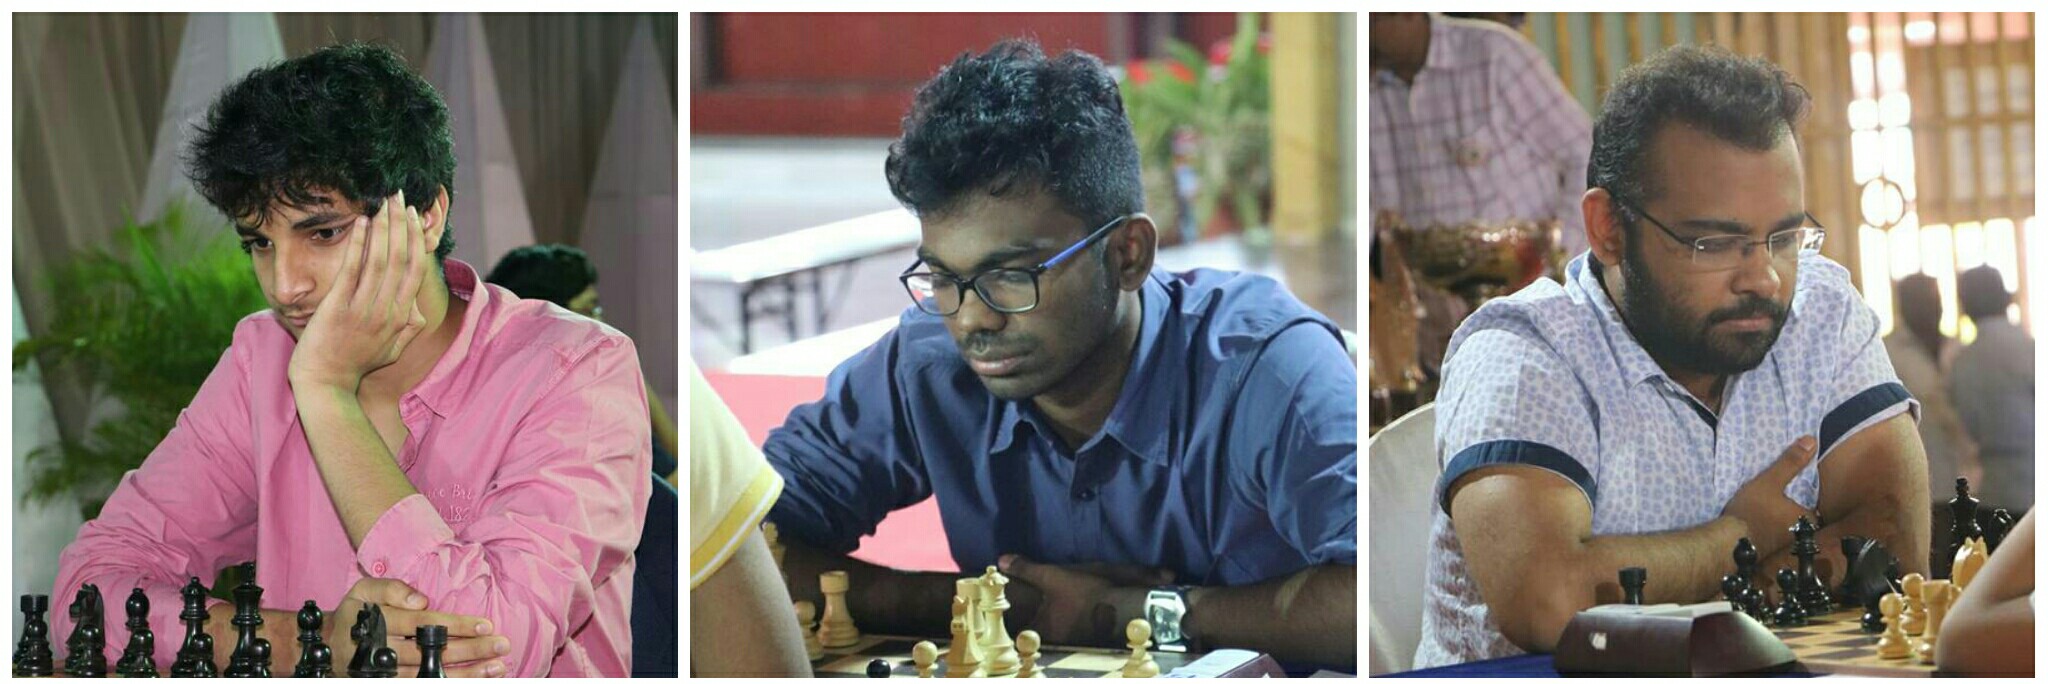 Gukesh clinches Norway Open Masters, Iniyan finishes second